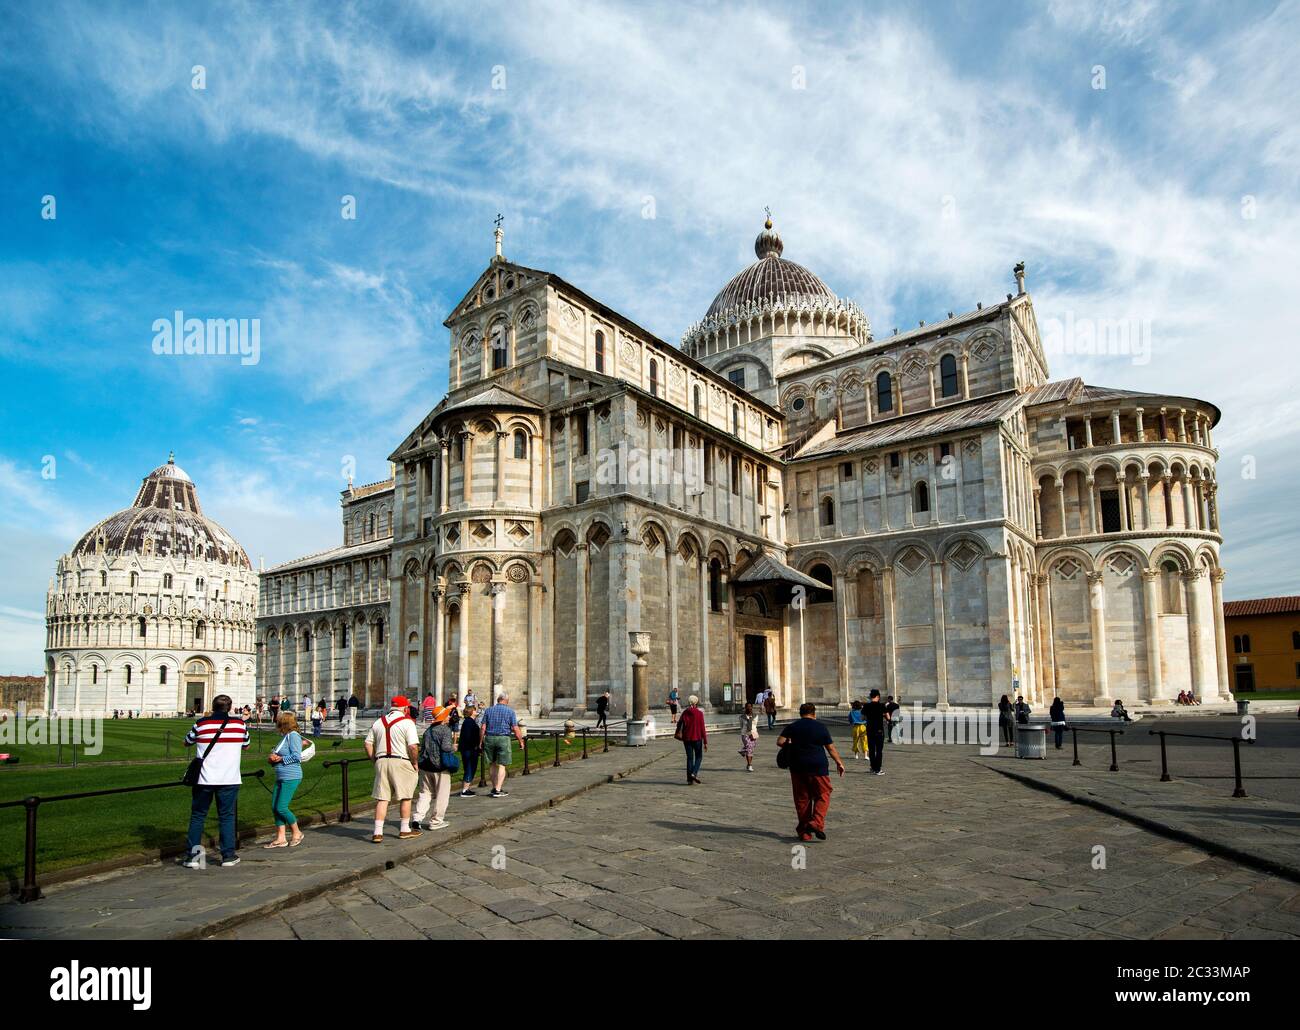 Pisa Cathedral or Duomo di Pisa on Piazza dei Miracoli, Pisa, Tuscany, Italy; Roman Catholic cathedral dedicated to the Assumption of the Virgin Mary. Stock Photo